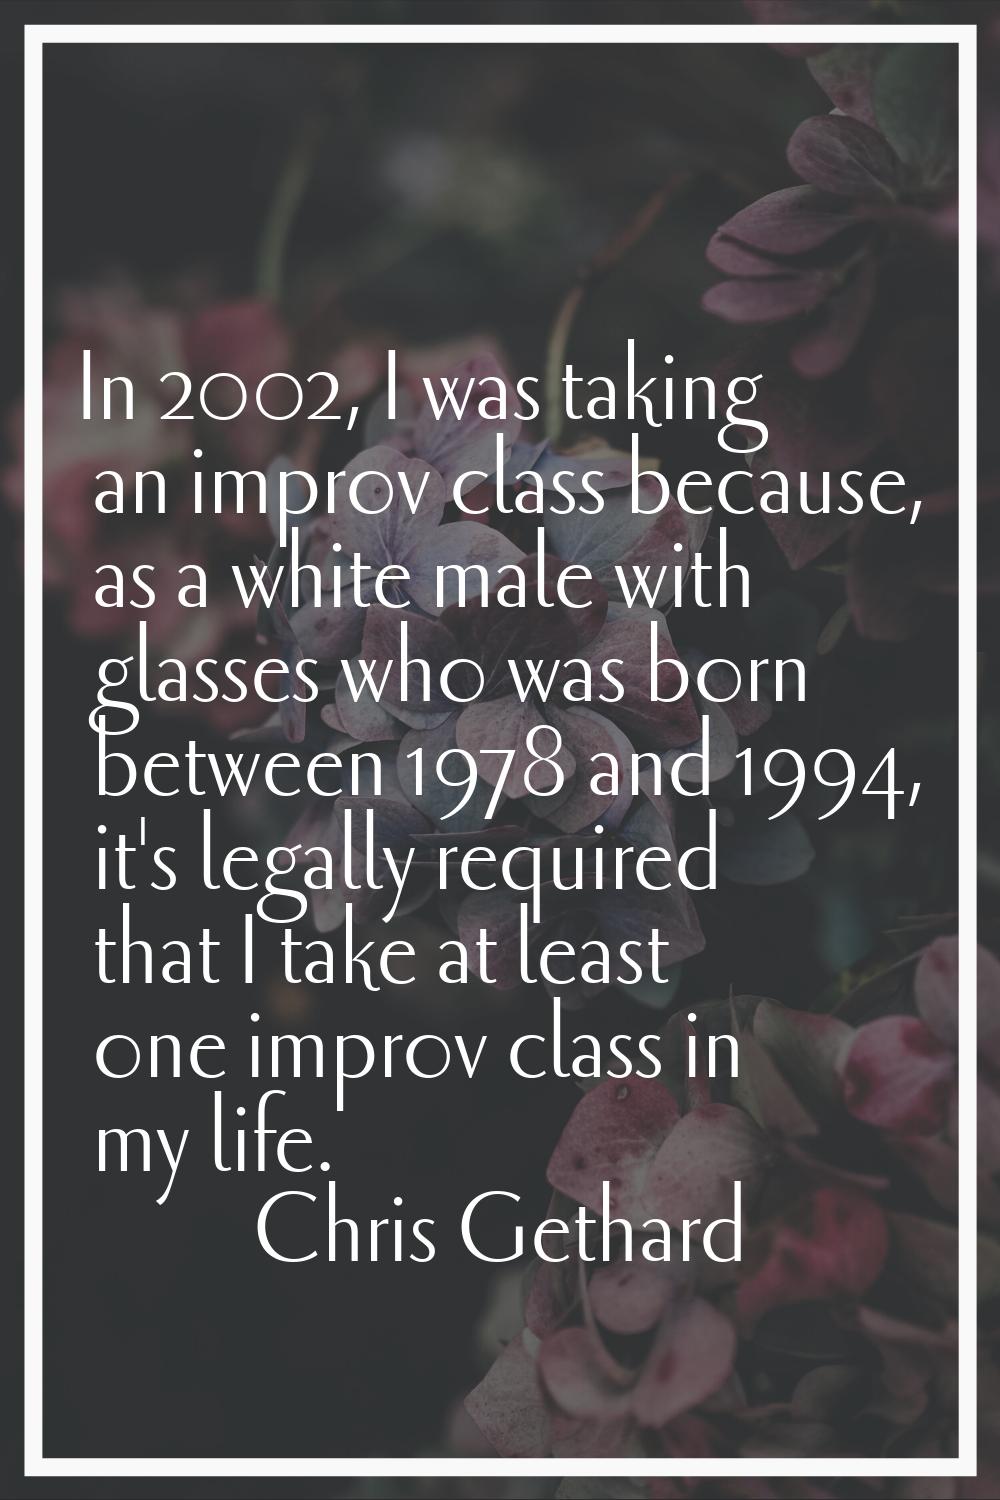 In 2002, I was taking an improv class because, as a white male with glasses who was born between 19